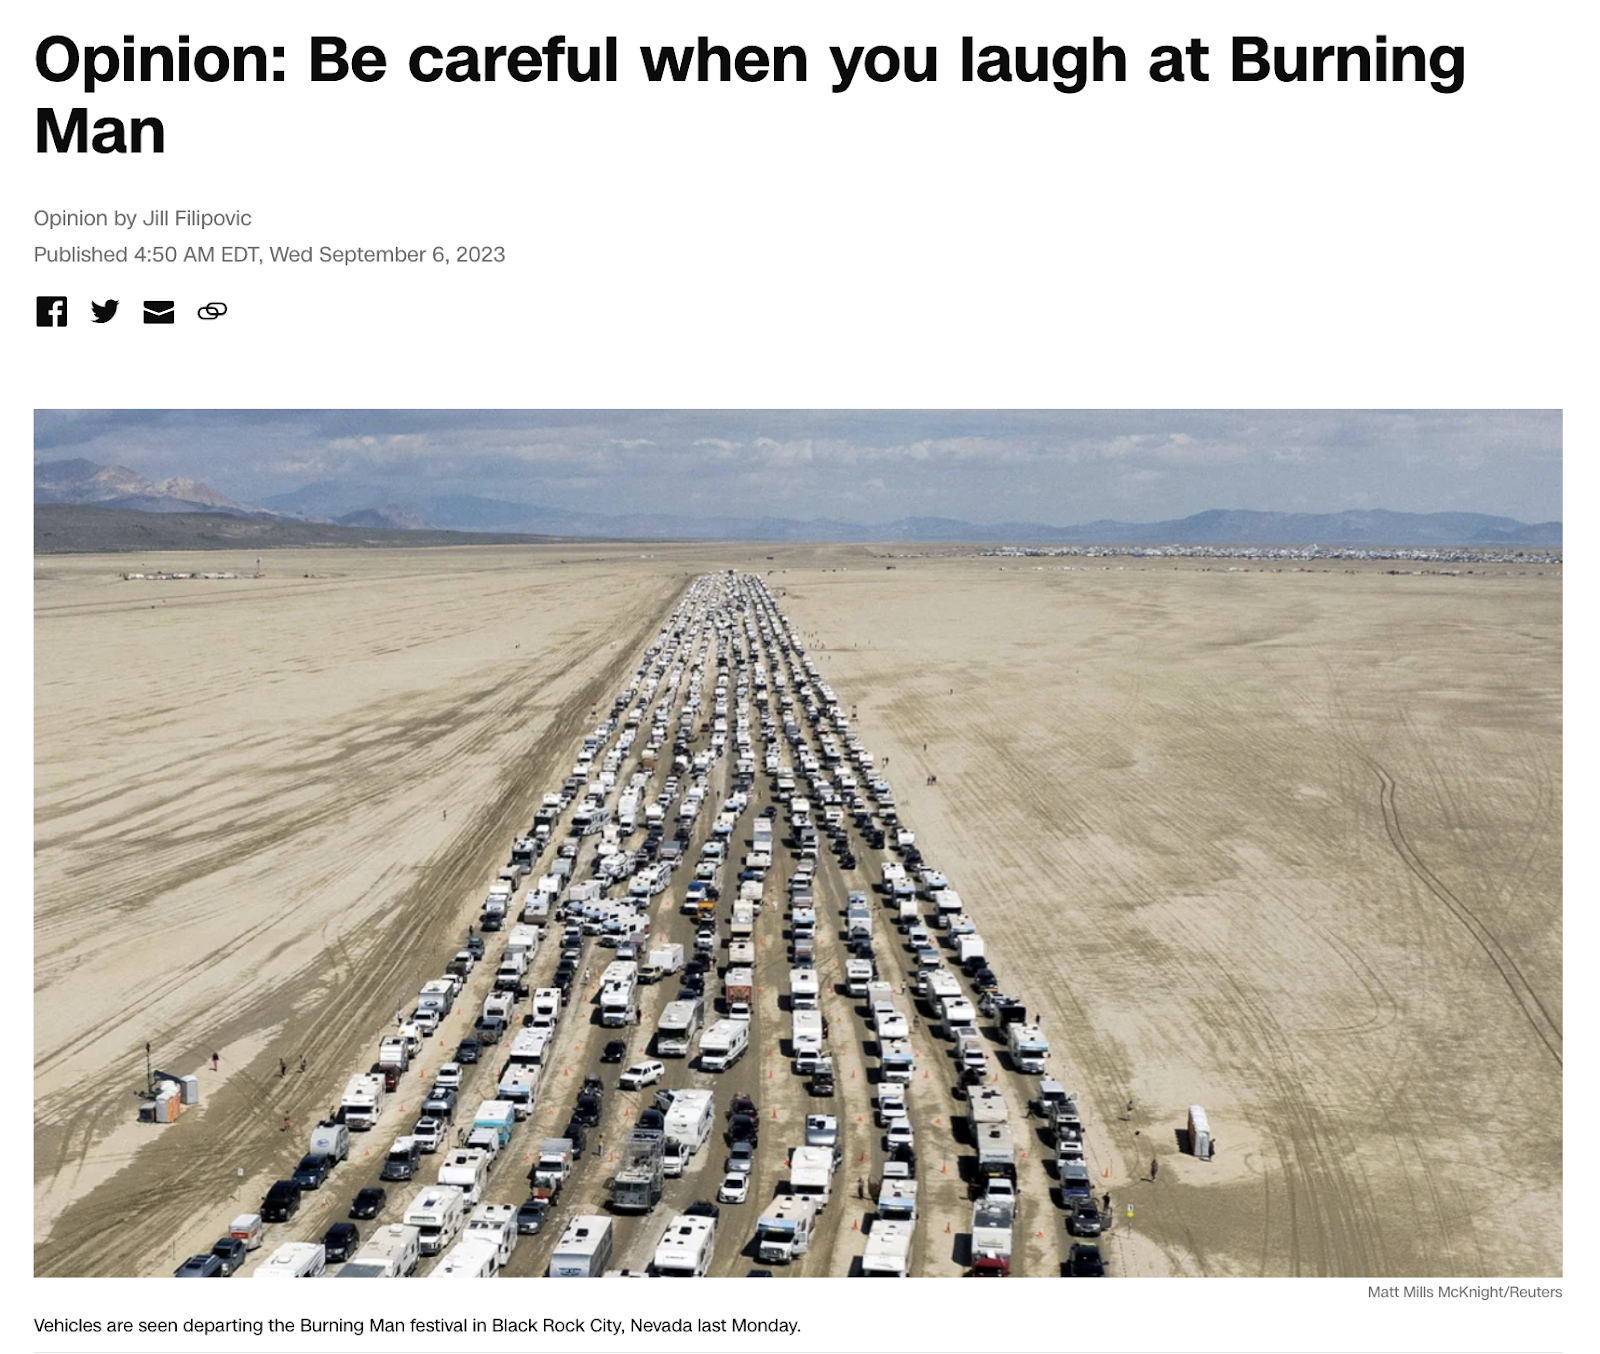 "Opinion: Be careful when you laugh at Burning Man" article on CNN